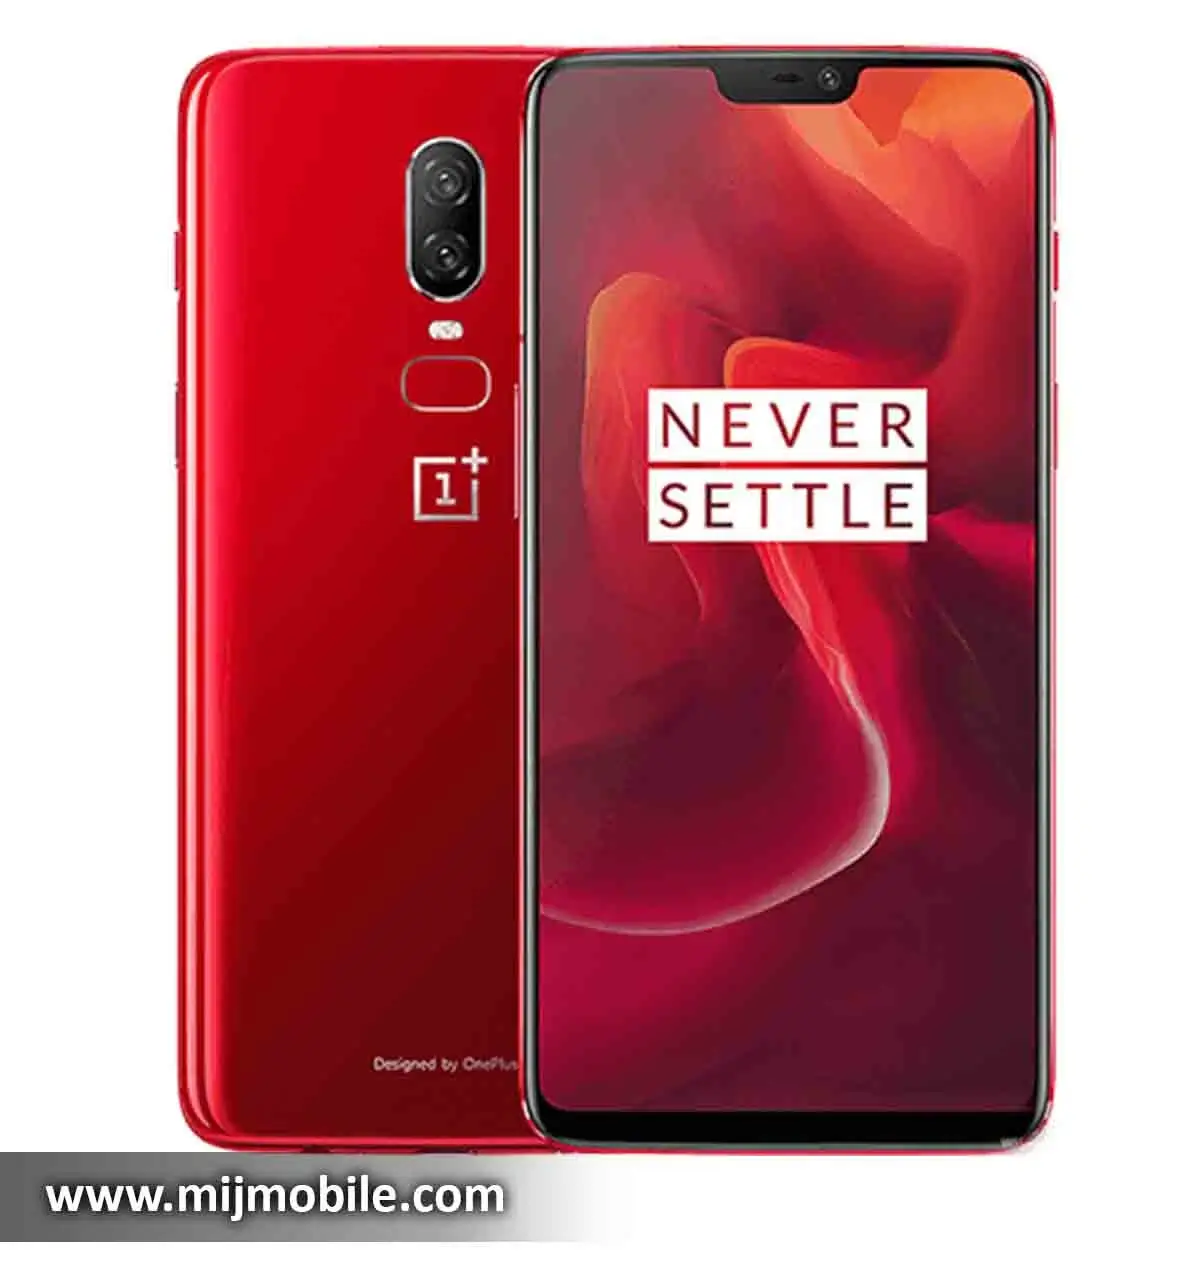 OnePlus 6 Price in Pakistan & Specifications OnePlus 6 Price in Pakistan is 78,000.